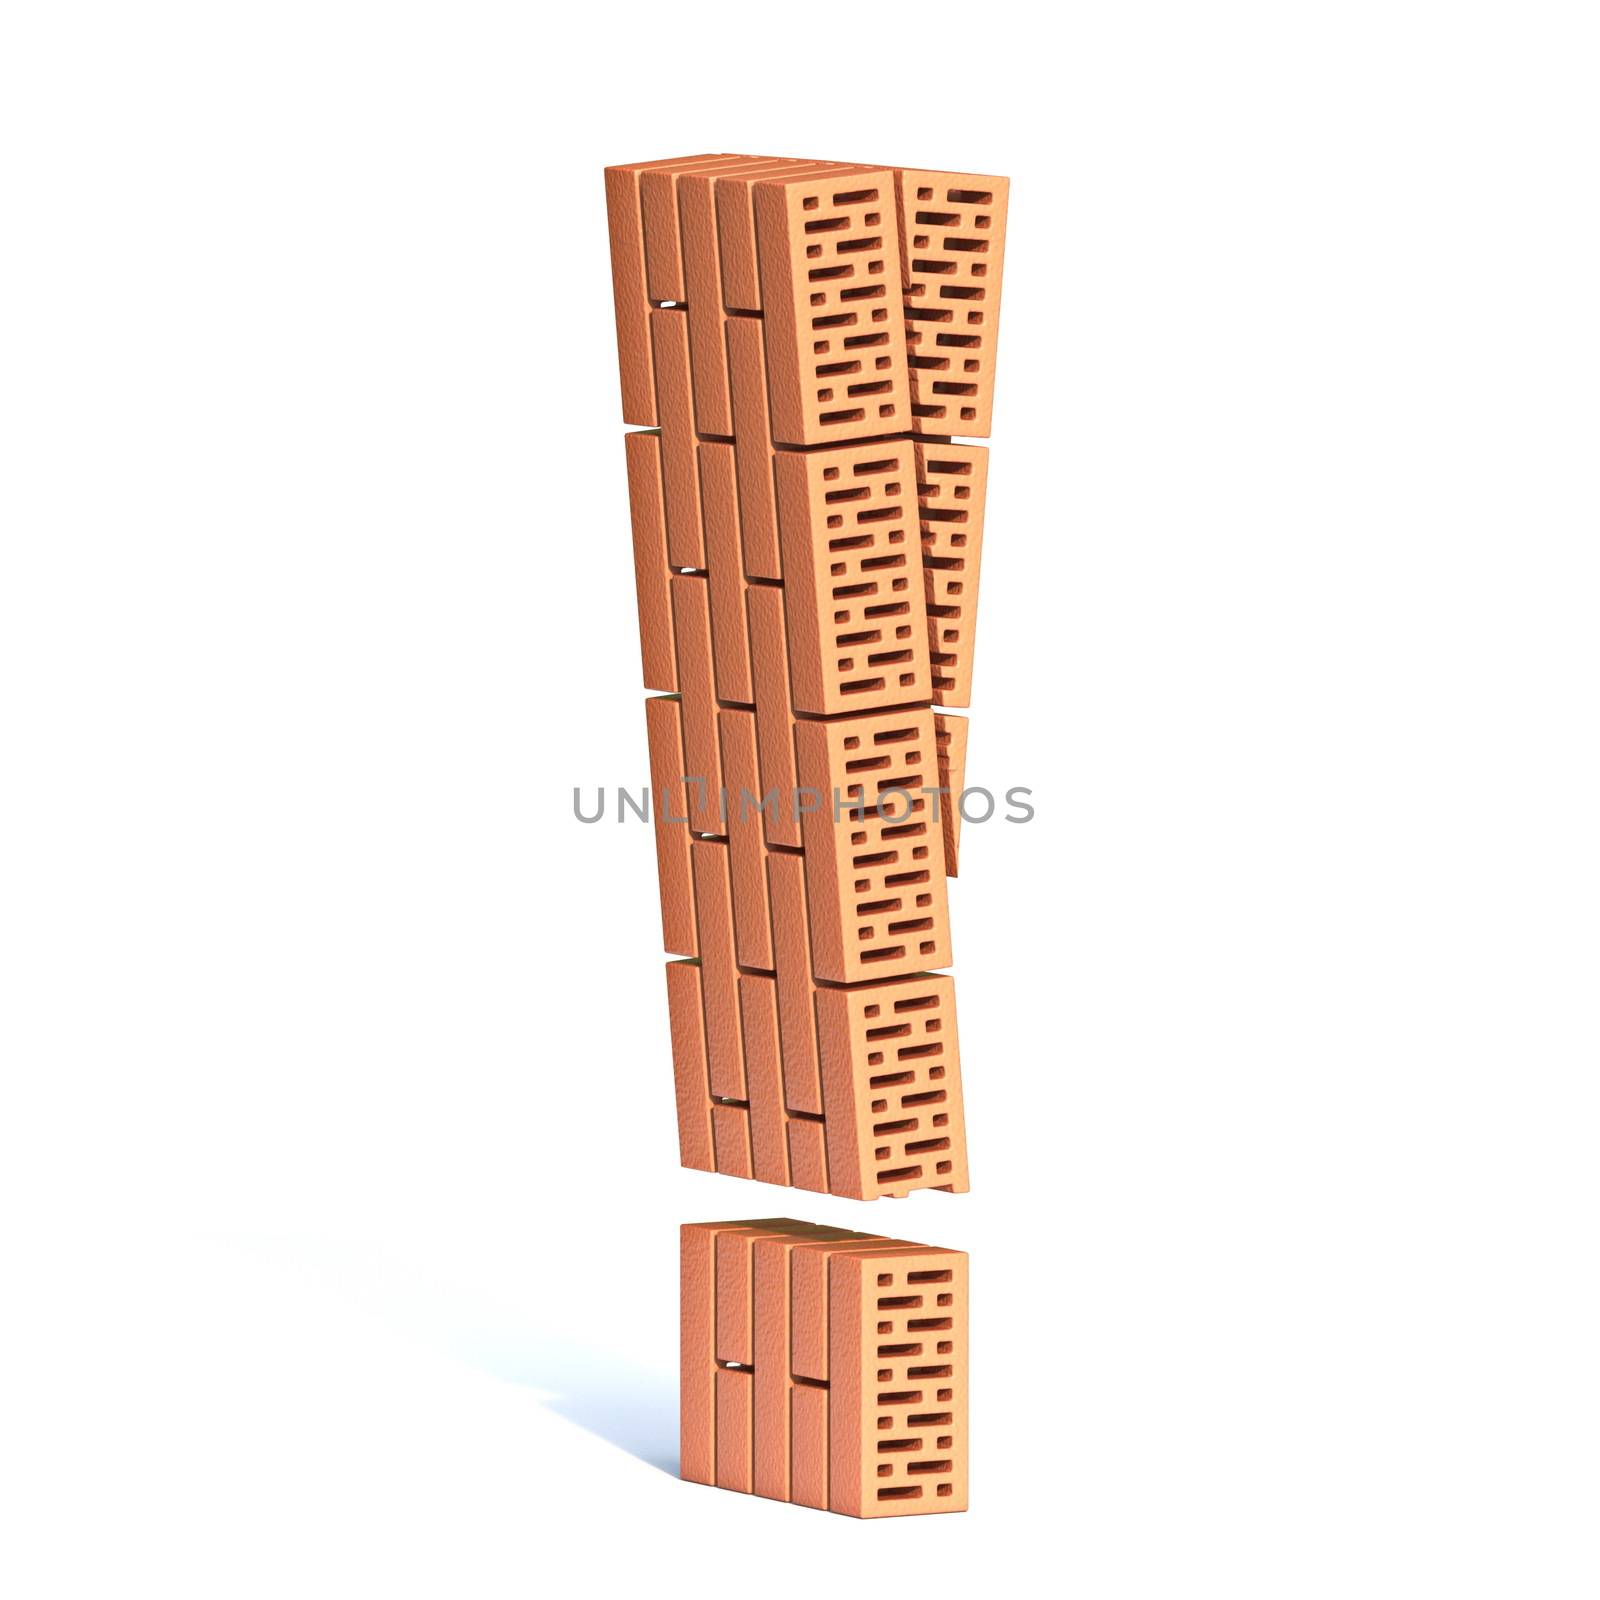 Brick wall font Exclamation mark 3D render illustration isolated on white background